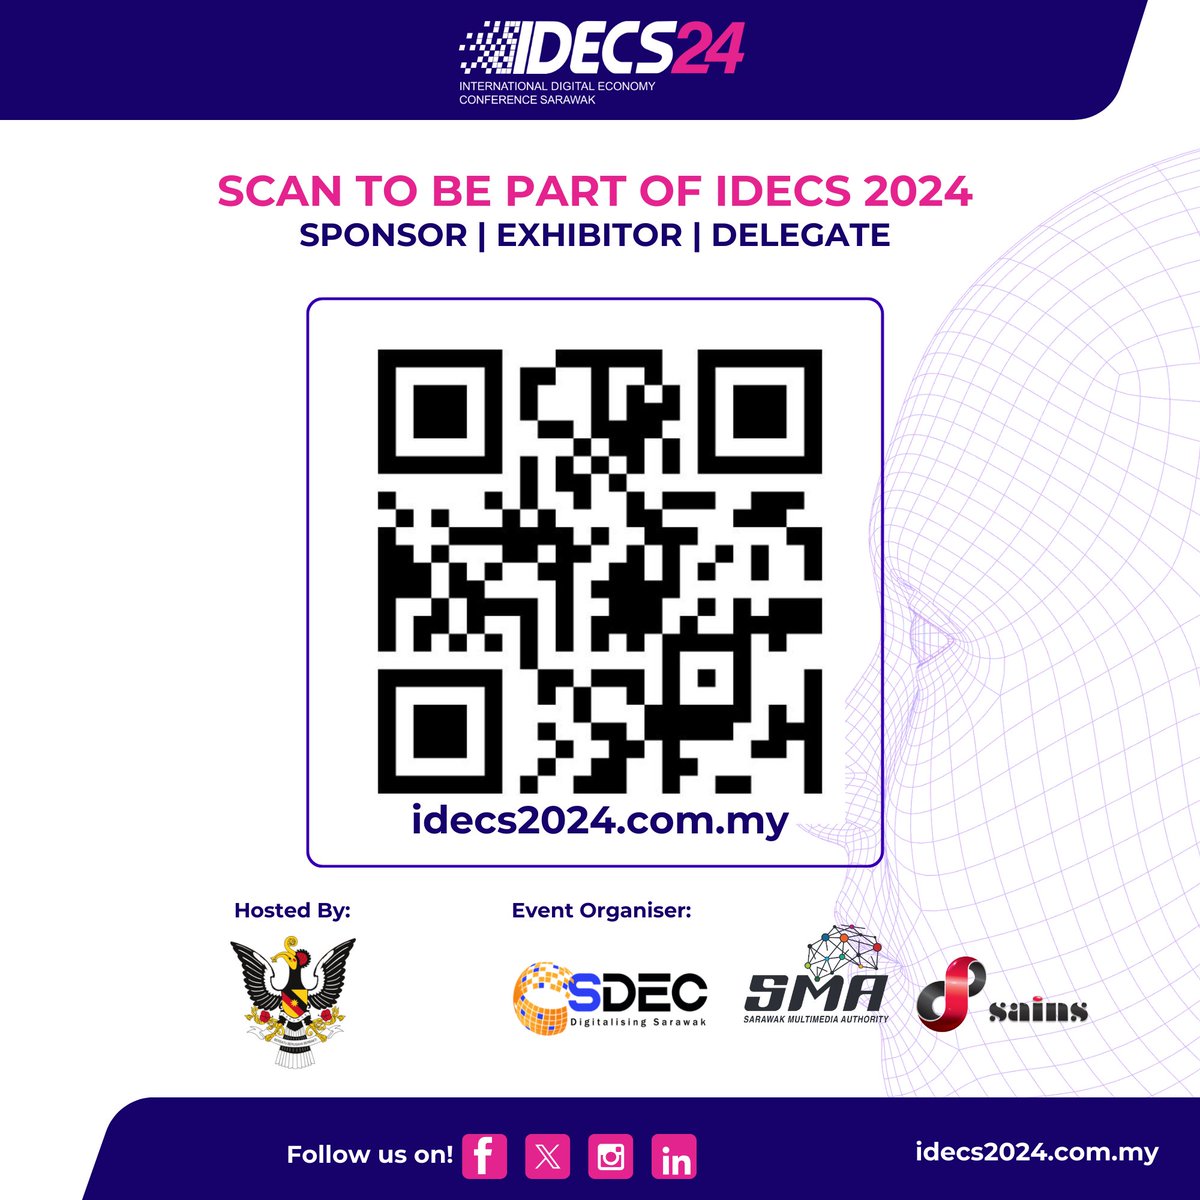 The International Digital Economy Conference Sarawak 2024 (IDECS 2024) is set to take centre stage on 17 & 18 October in Kuching, Sarawak! Stay tuned to this page or visit idecs2024.com.my for details.
#SDEC #digitalisingSarawak #IDECS2024  #artificialintelligence